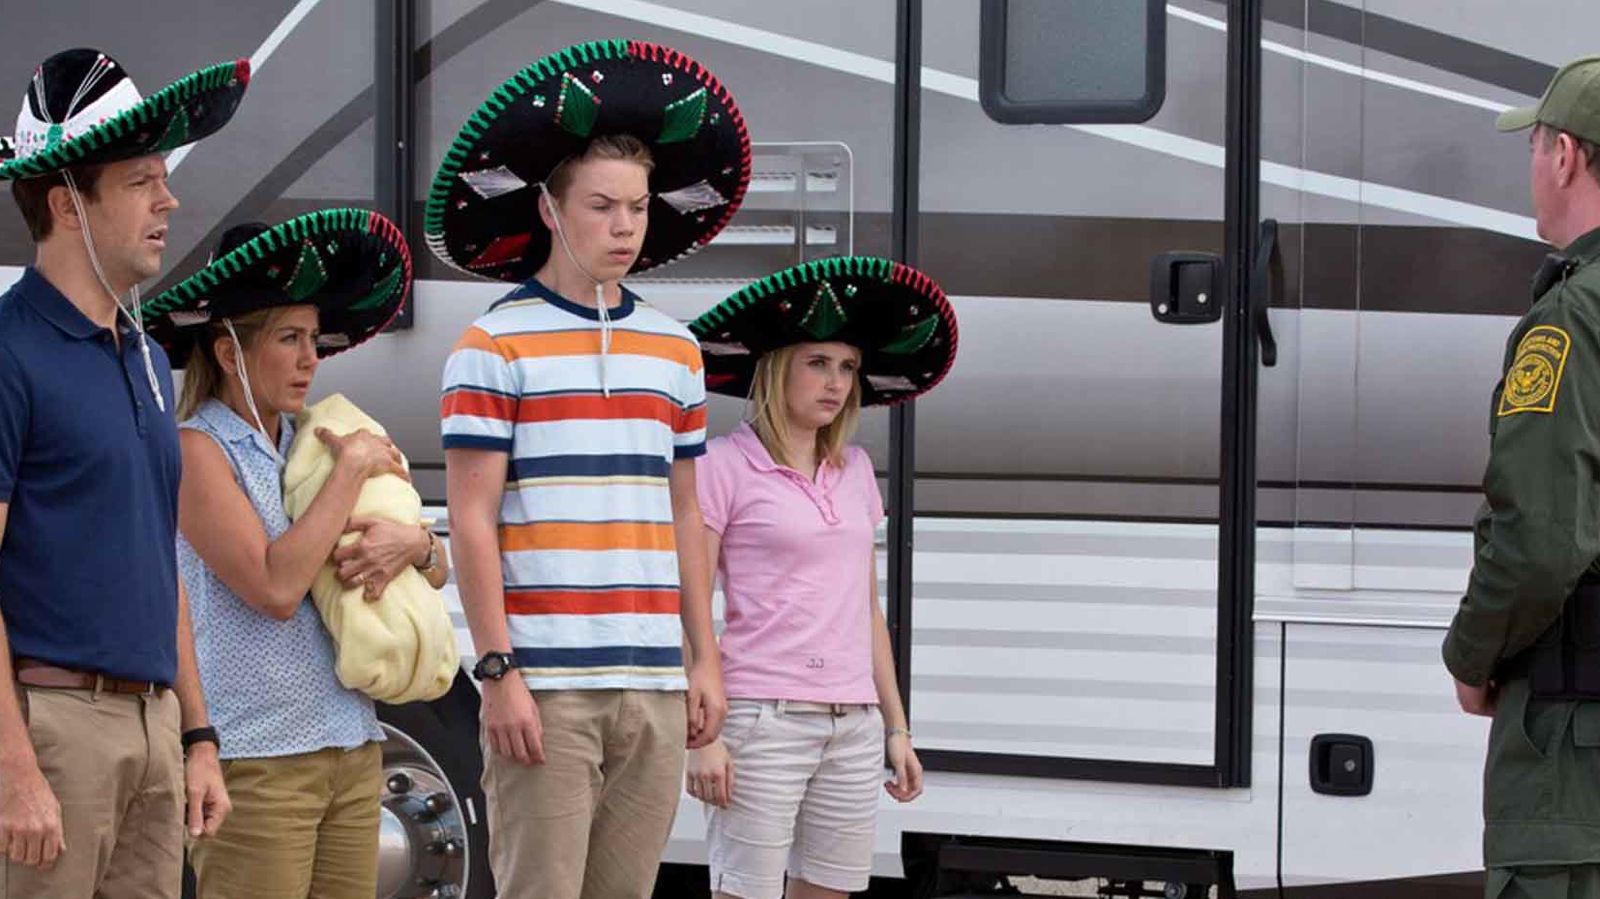 Gallery of Streaming Film We Re The Millers Sub Indo.